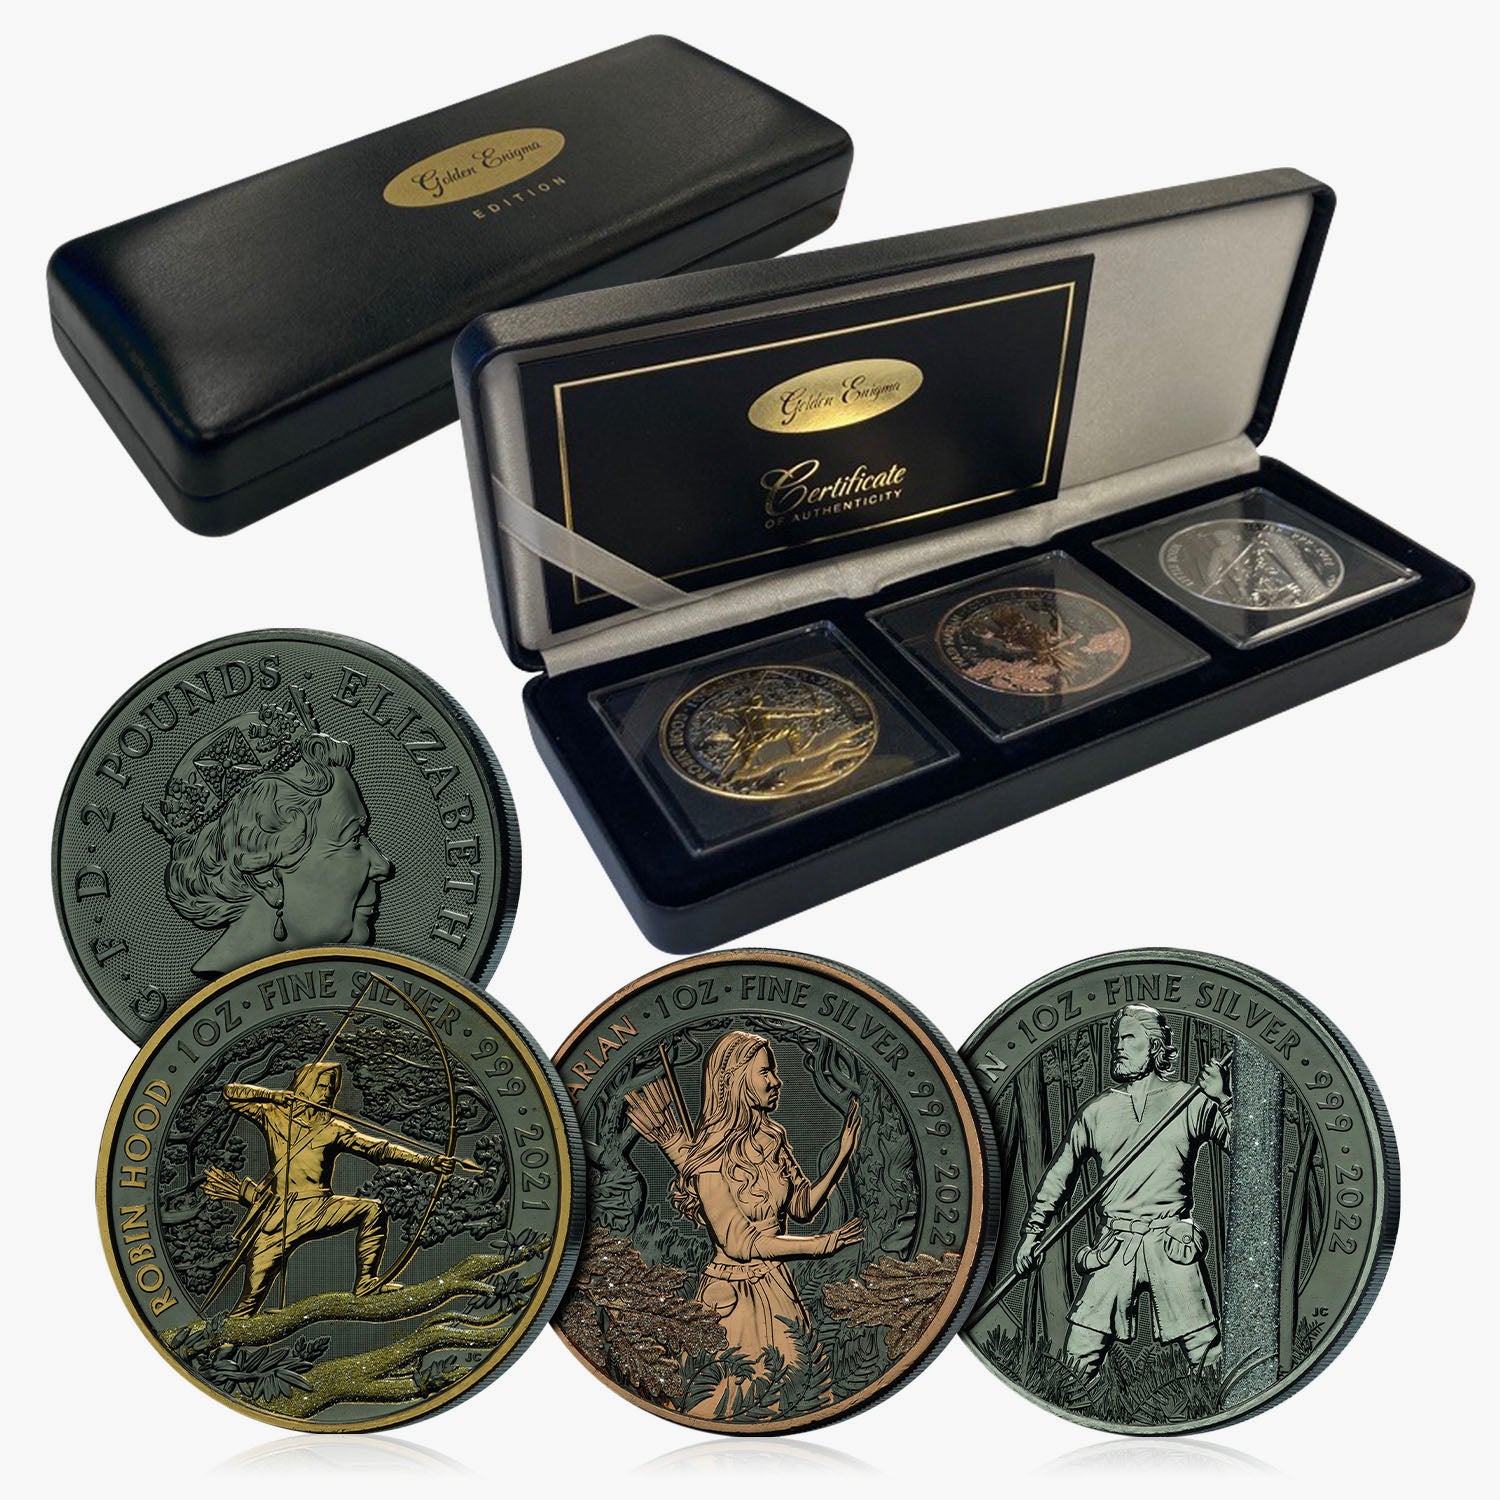 Robin Hood Coin Boxset with Black Ruthenium and Gold Gilding